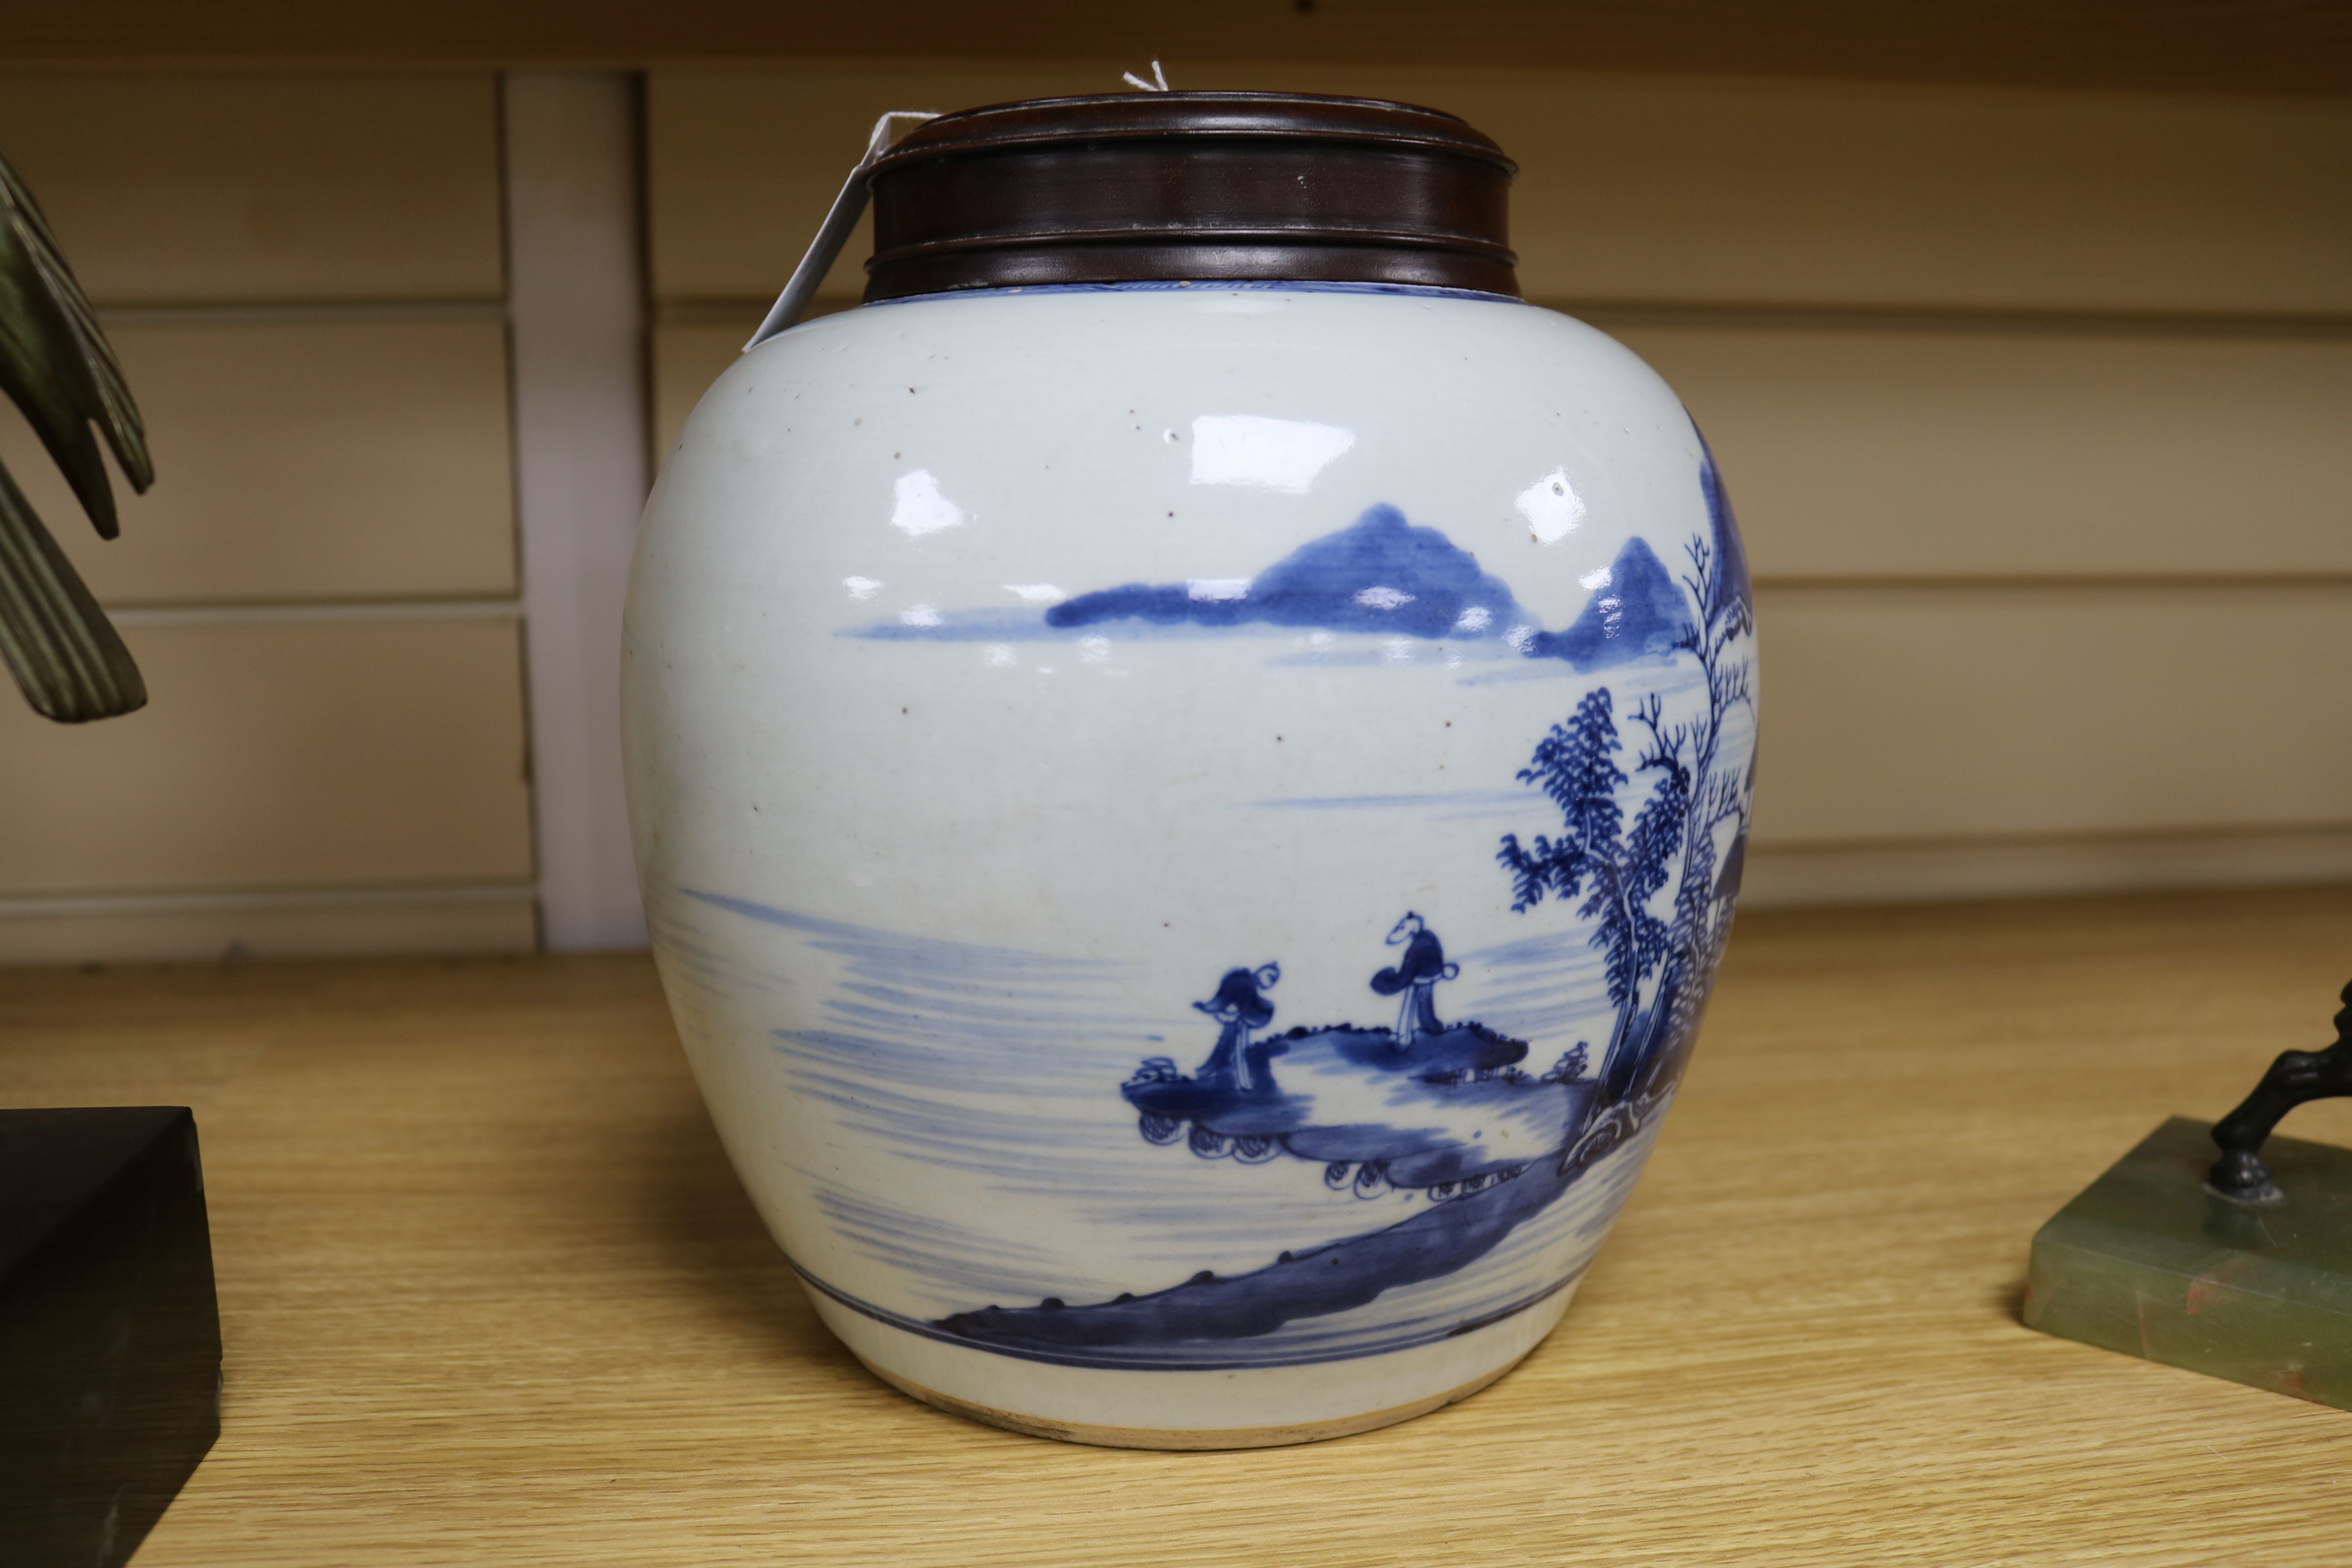 A Chinese blue and white ovoid jar, 18th century, painted with sages in a river landscape scene with - Image 10 of 11